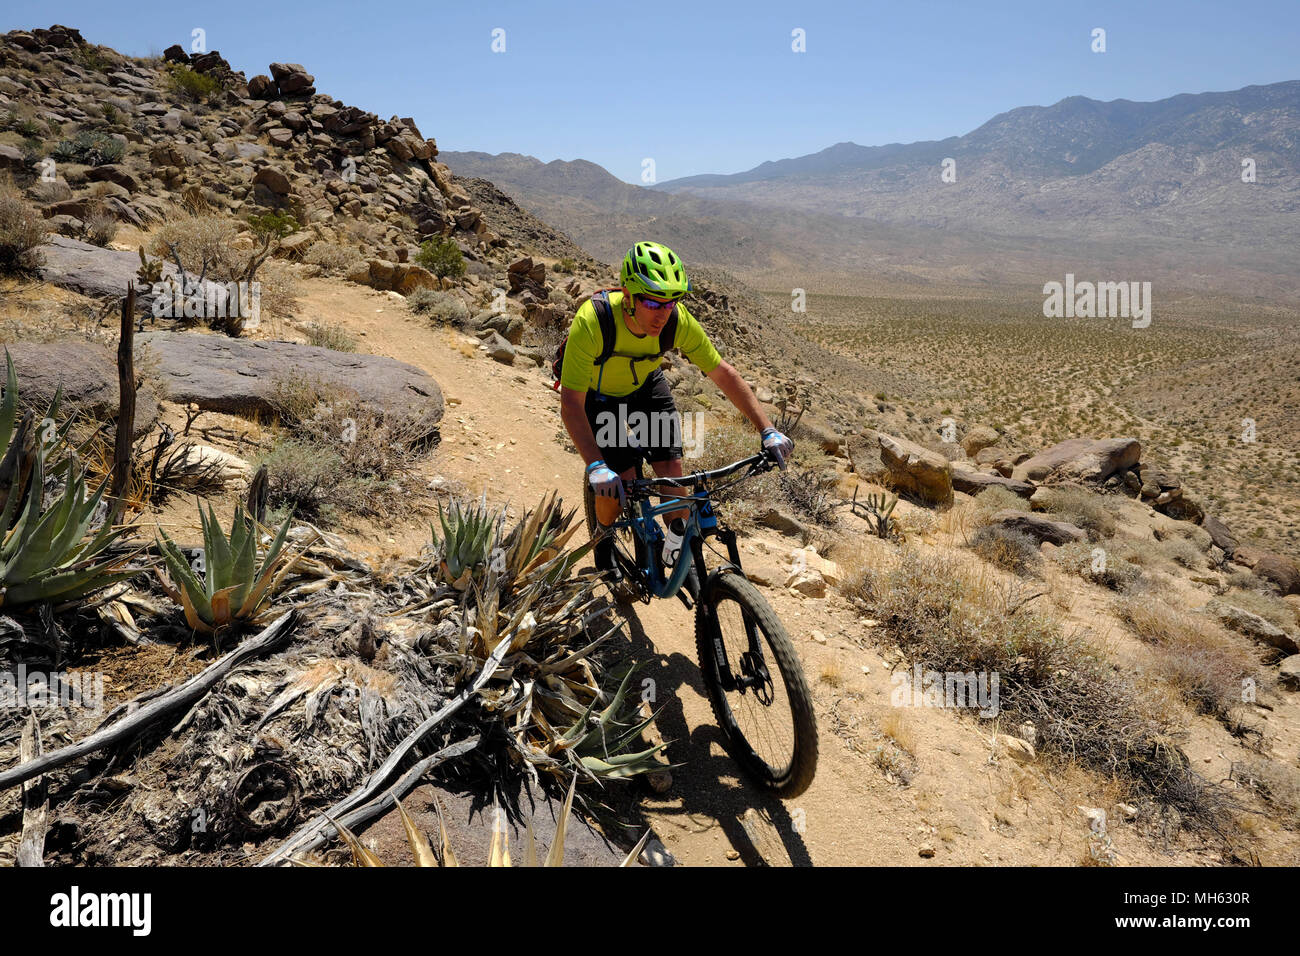 Palm Springs, California, USA. 28th Apr, 2018. Mountain bikers pass cactus and high desert vistas on the trail. This is a true Southern California Epic mountain bike ride in the Santa Rosa and San Jacinto Mountains National Monument. Offering huge vistas, off-camber narrow single track, ridges, stream beds, rocks, sand, cactus. This point-to-point route passes a varied array of high desert trails from the foot of the north slope of Santa Rosa Mountains and Agua Caliente Indian Reservation at 4500 feet down to Palm Springs 29 miles away at 500 feet. (Credit Image: © Ruaridh Stewart via ZUMA Wi Stock Photo